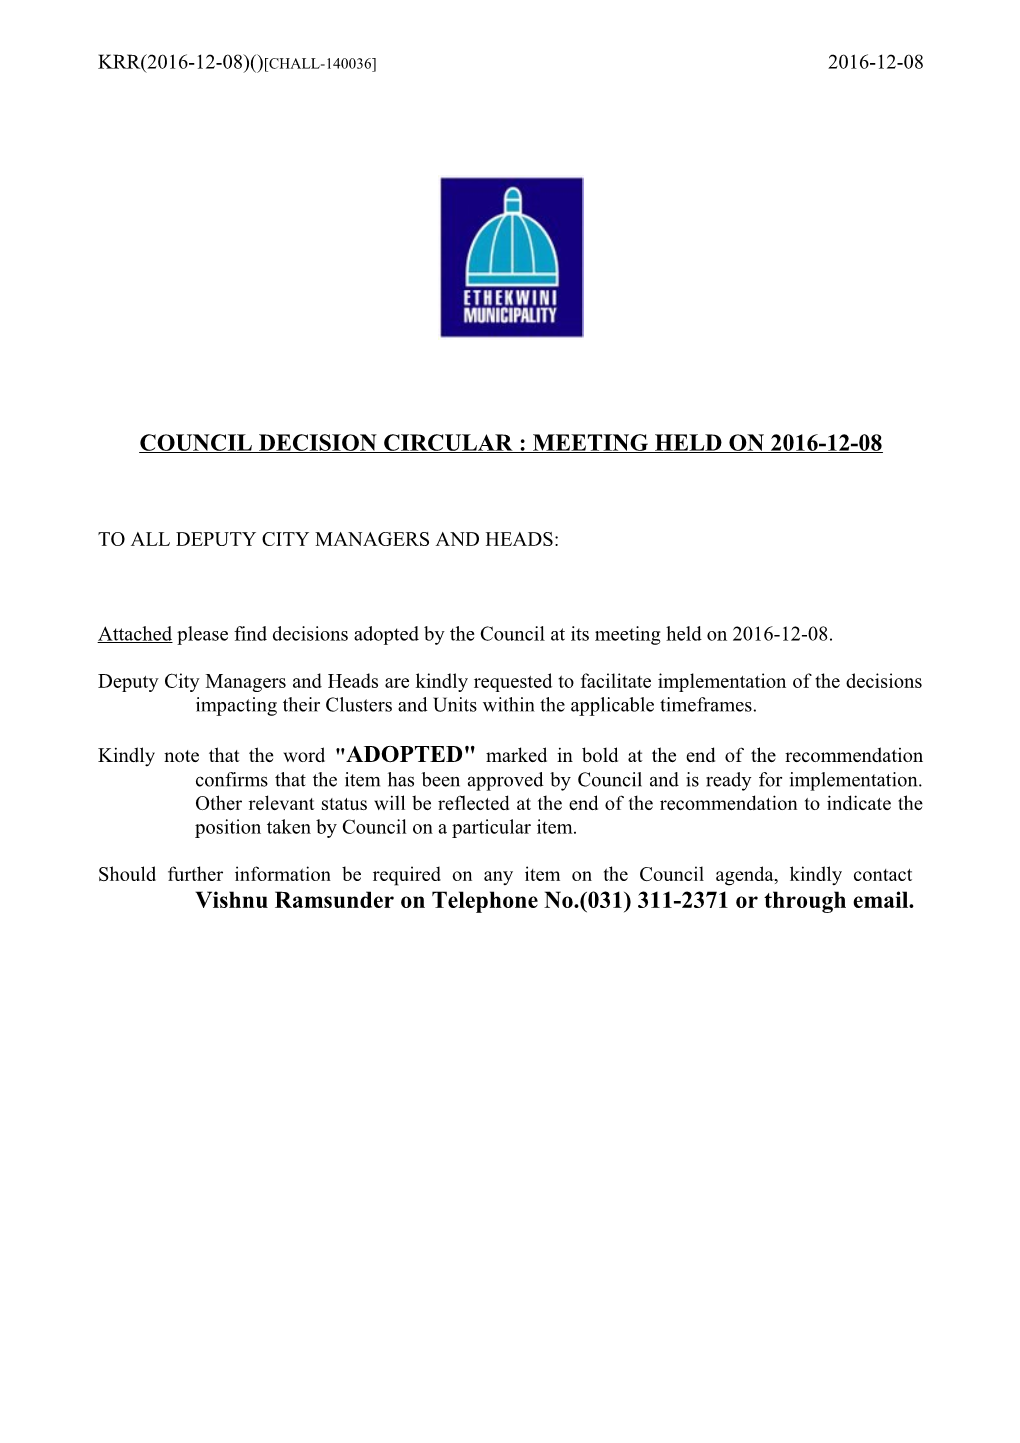 Council Decision Circular : Meeting Held on 2016-12-08